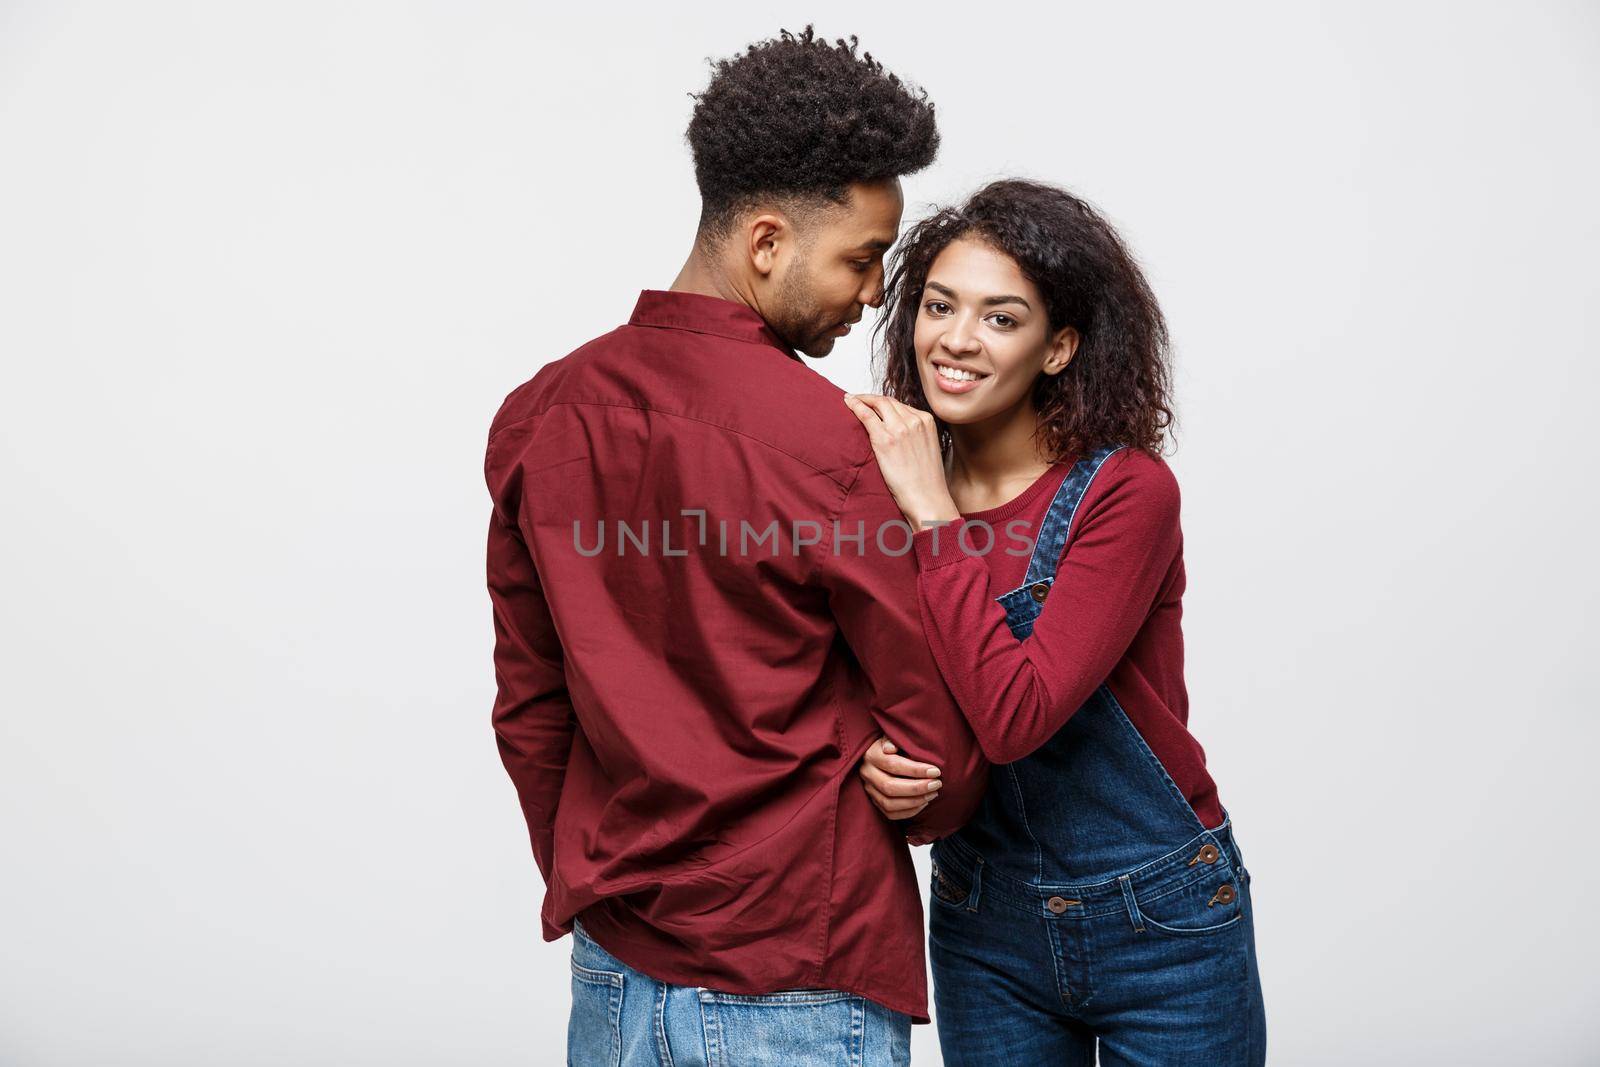 portrait of happy african american couple hug each other on white background